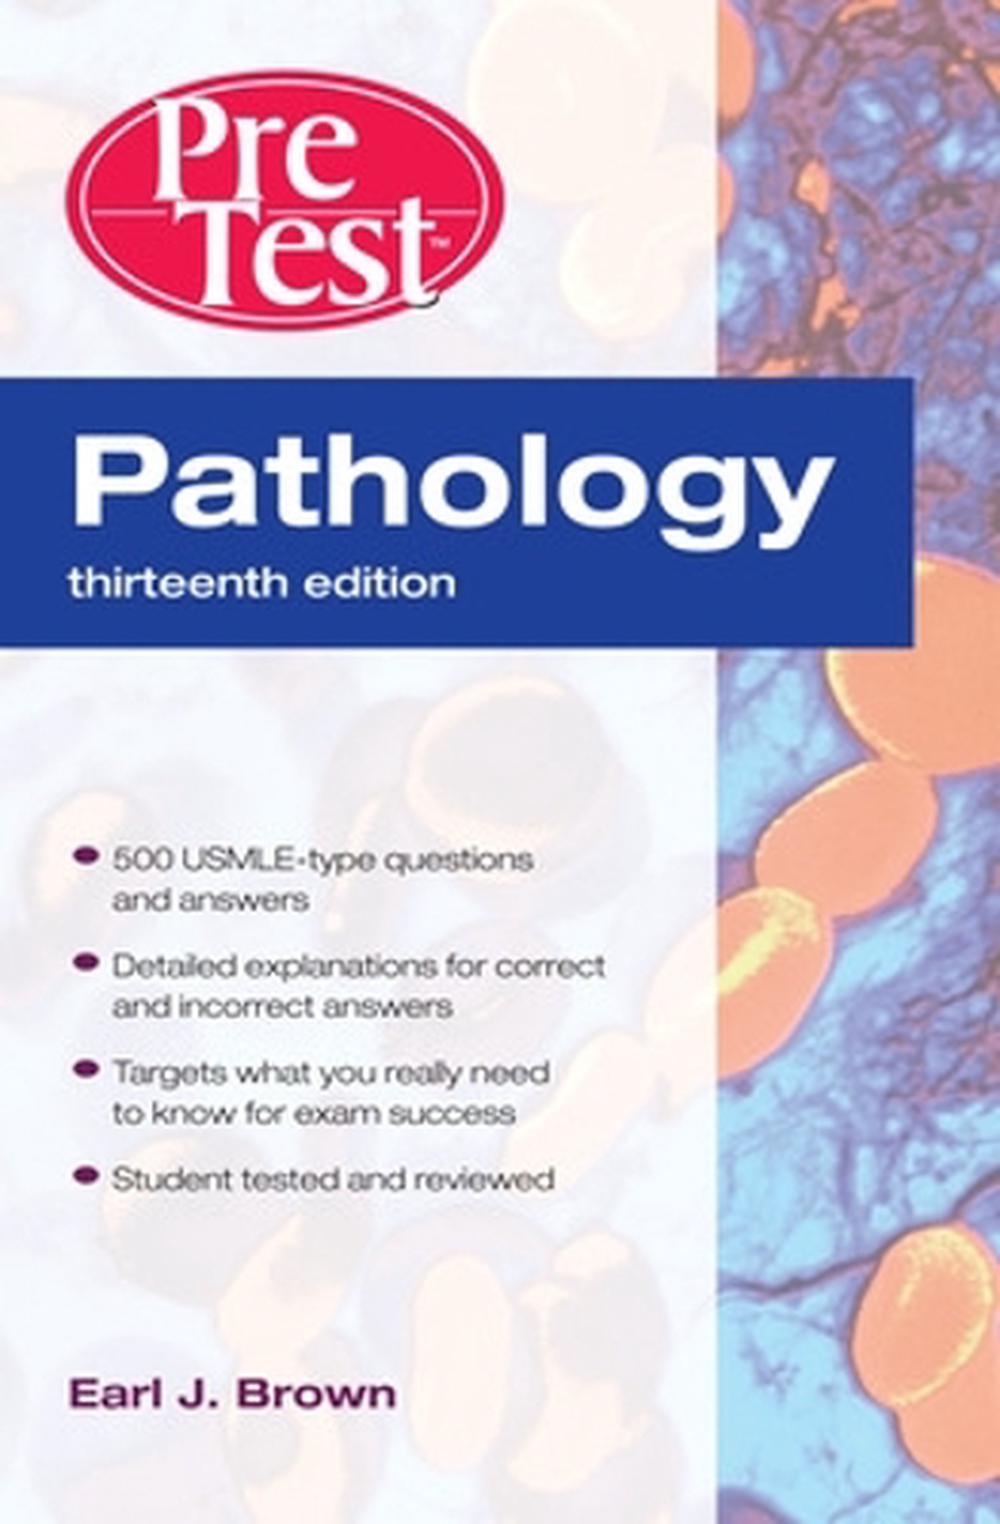 pathology illustrated table of content